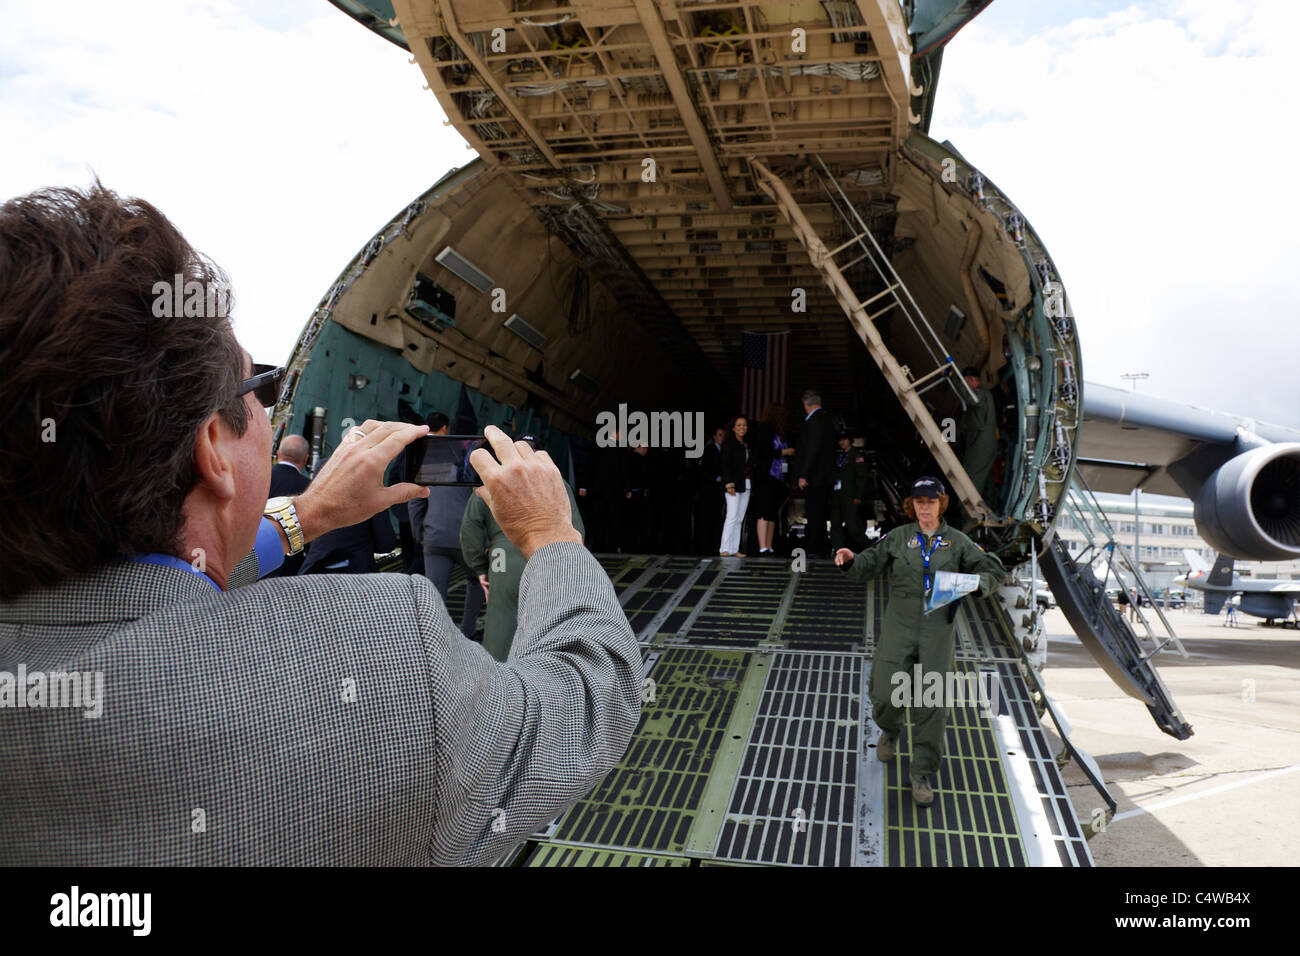 A man takes a photograph of the inside of a C-5M Super Galaxy at the Paris Air Show, June 2011 Stock Photo